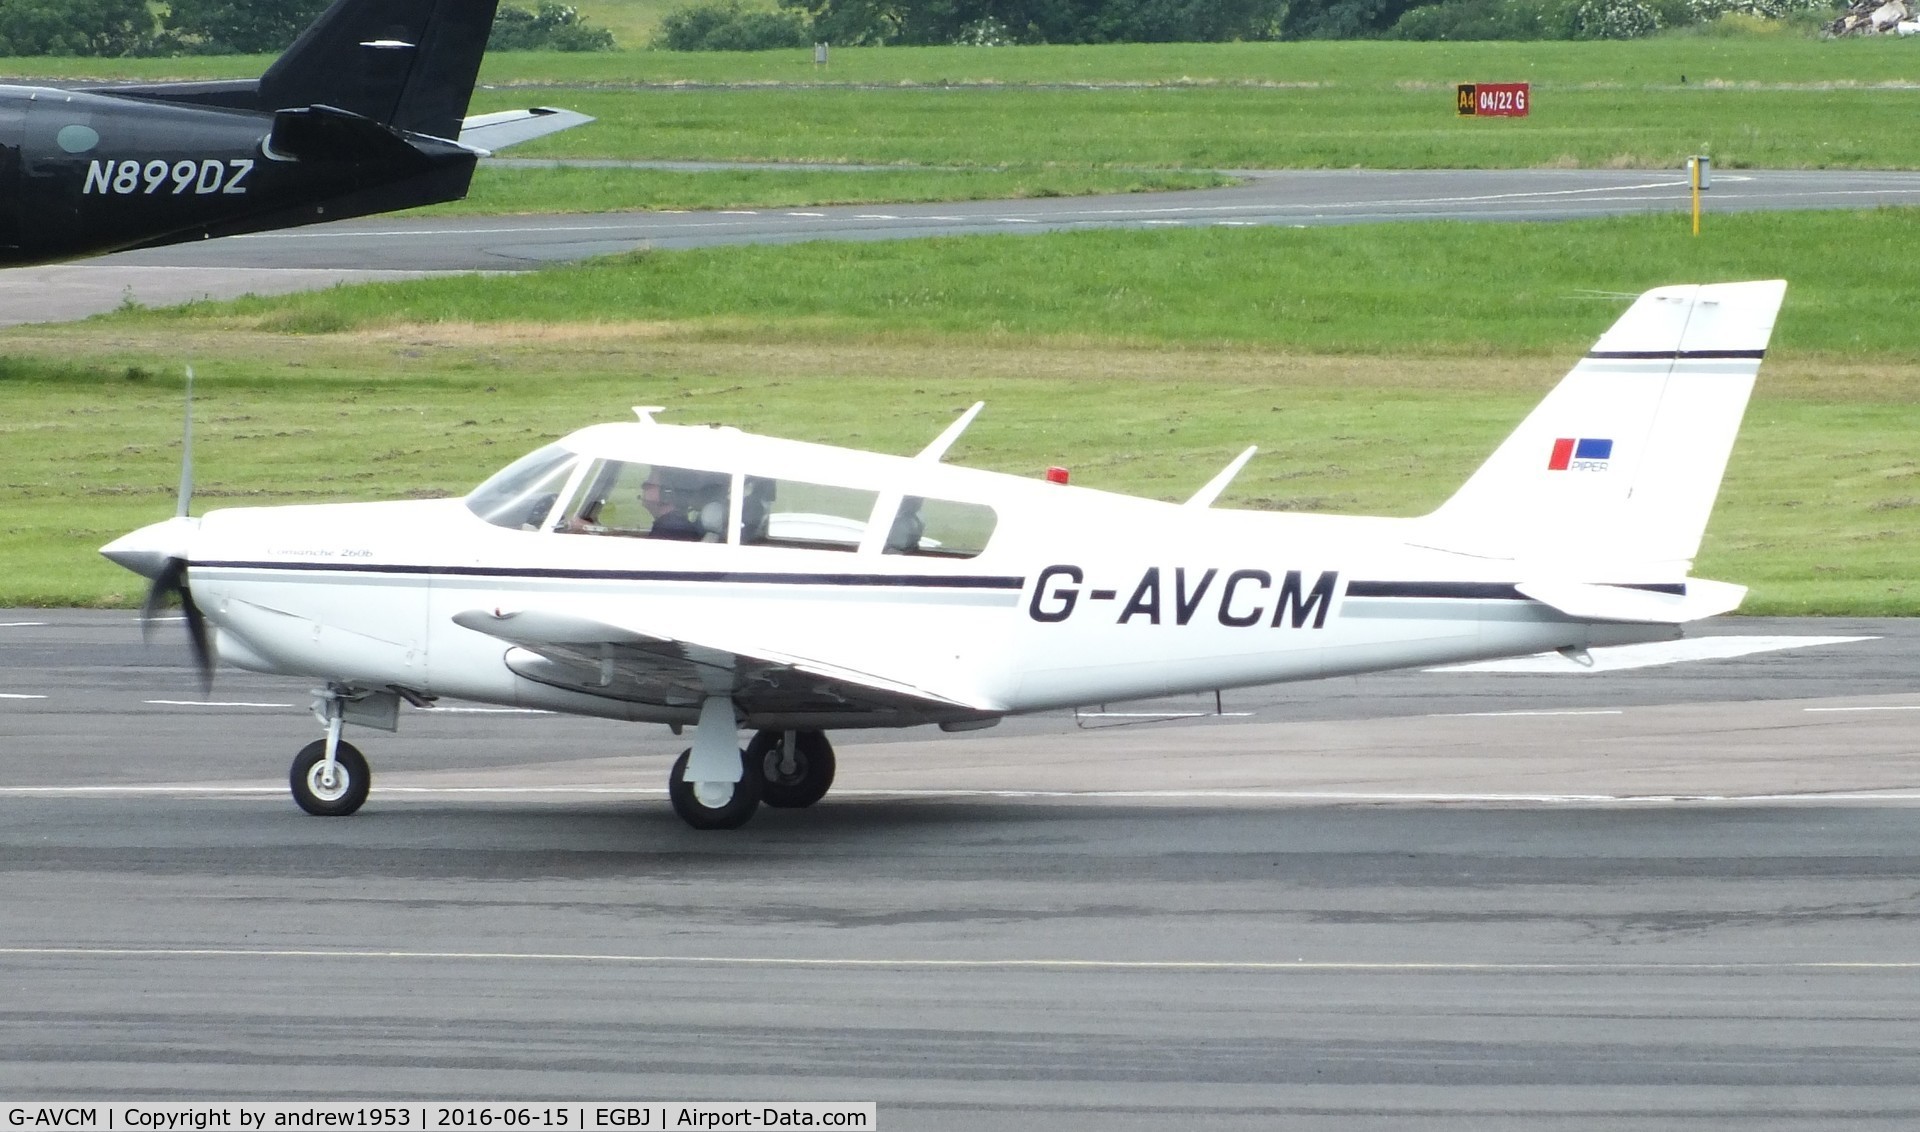 G-AVCM, 1966 Piper PA-24-260 Comanche B C/N 24-4520, G-AVCM at Gloucestershire Airport.